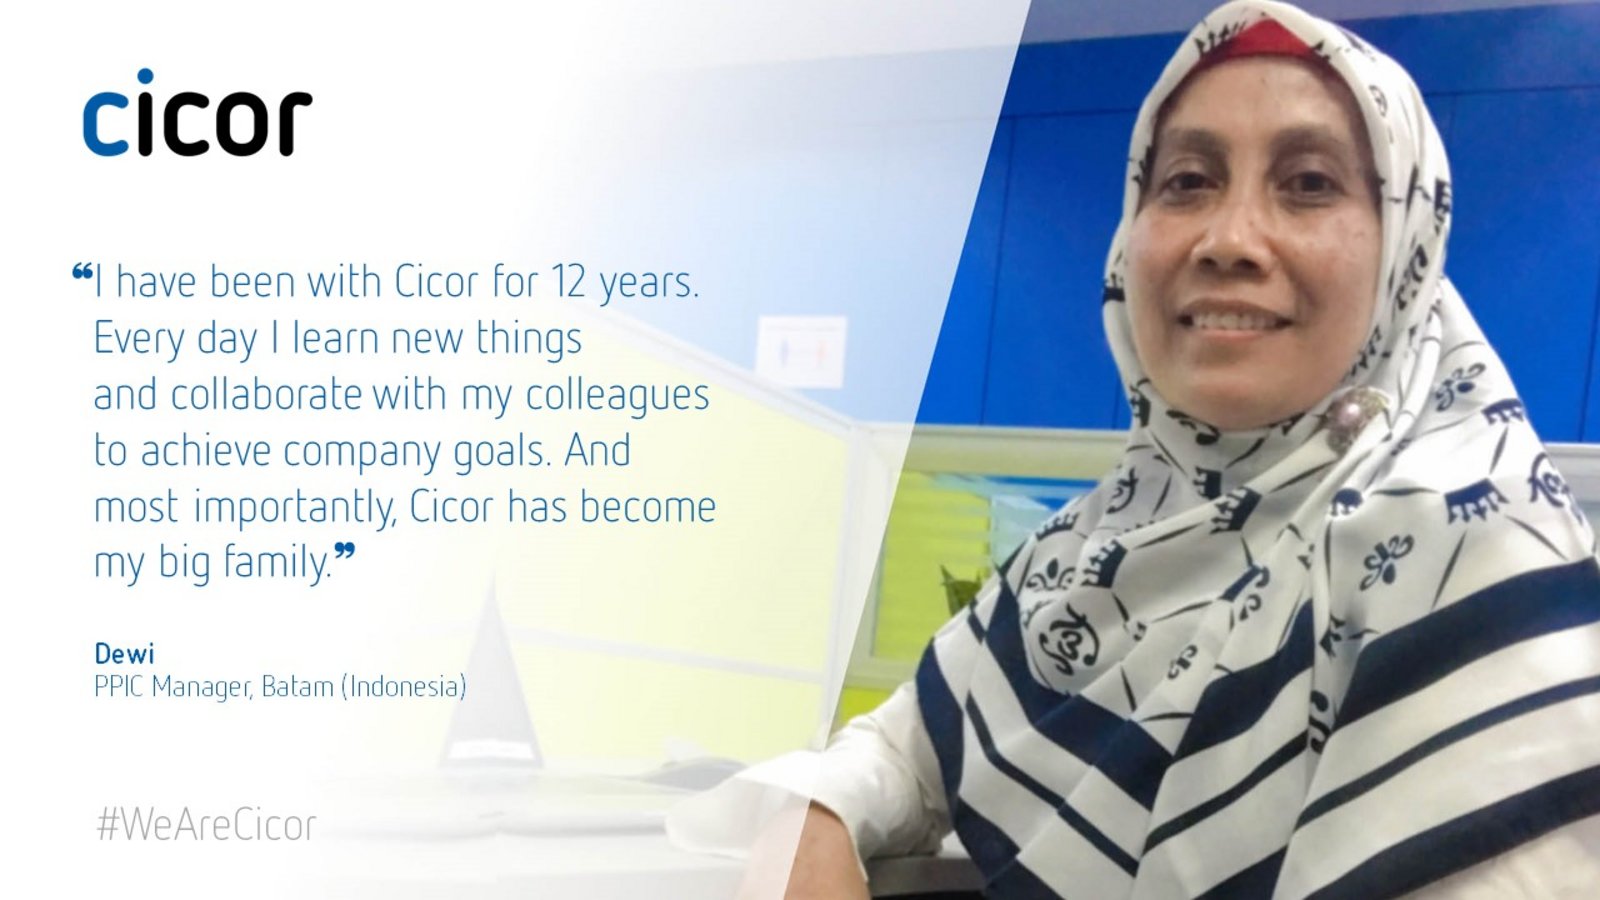 Testimonial of Dewi who works at the Cicor site in Batam